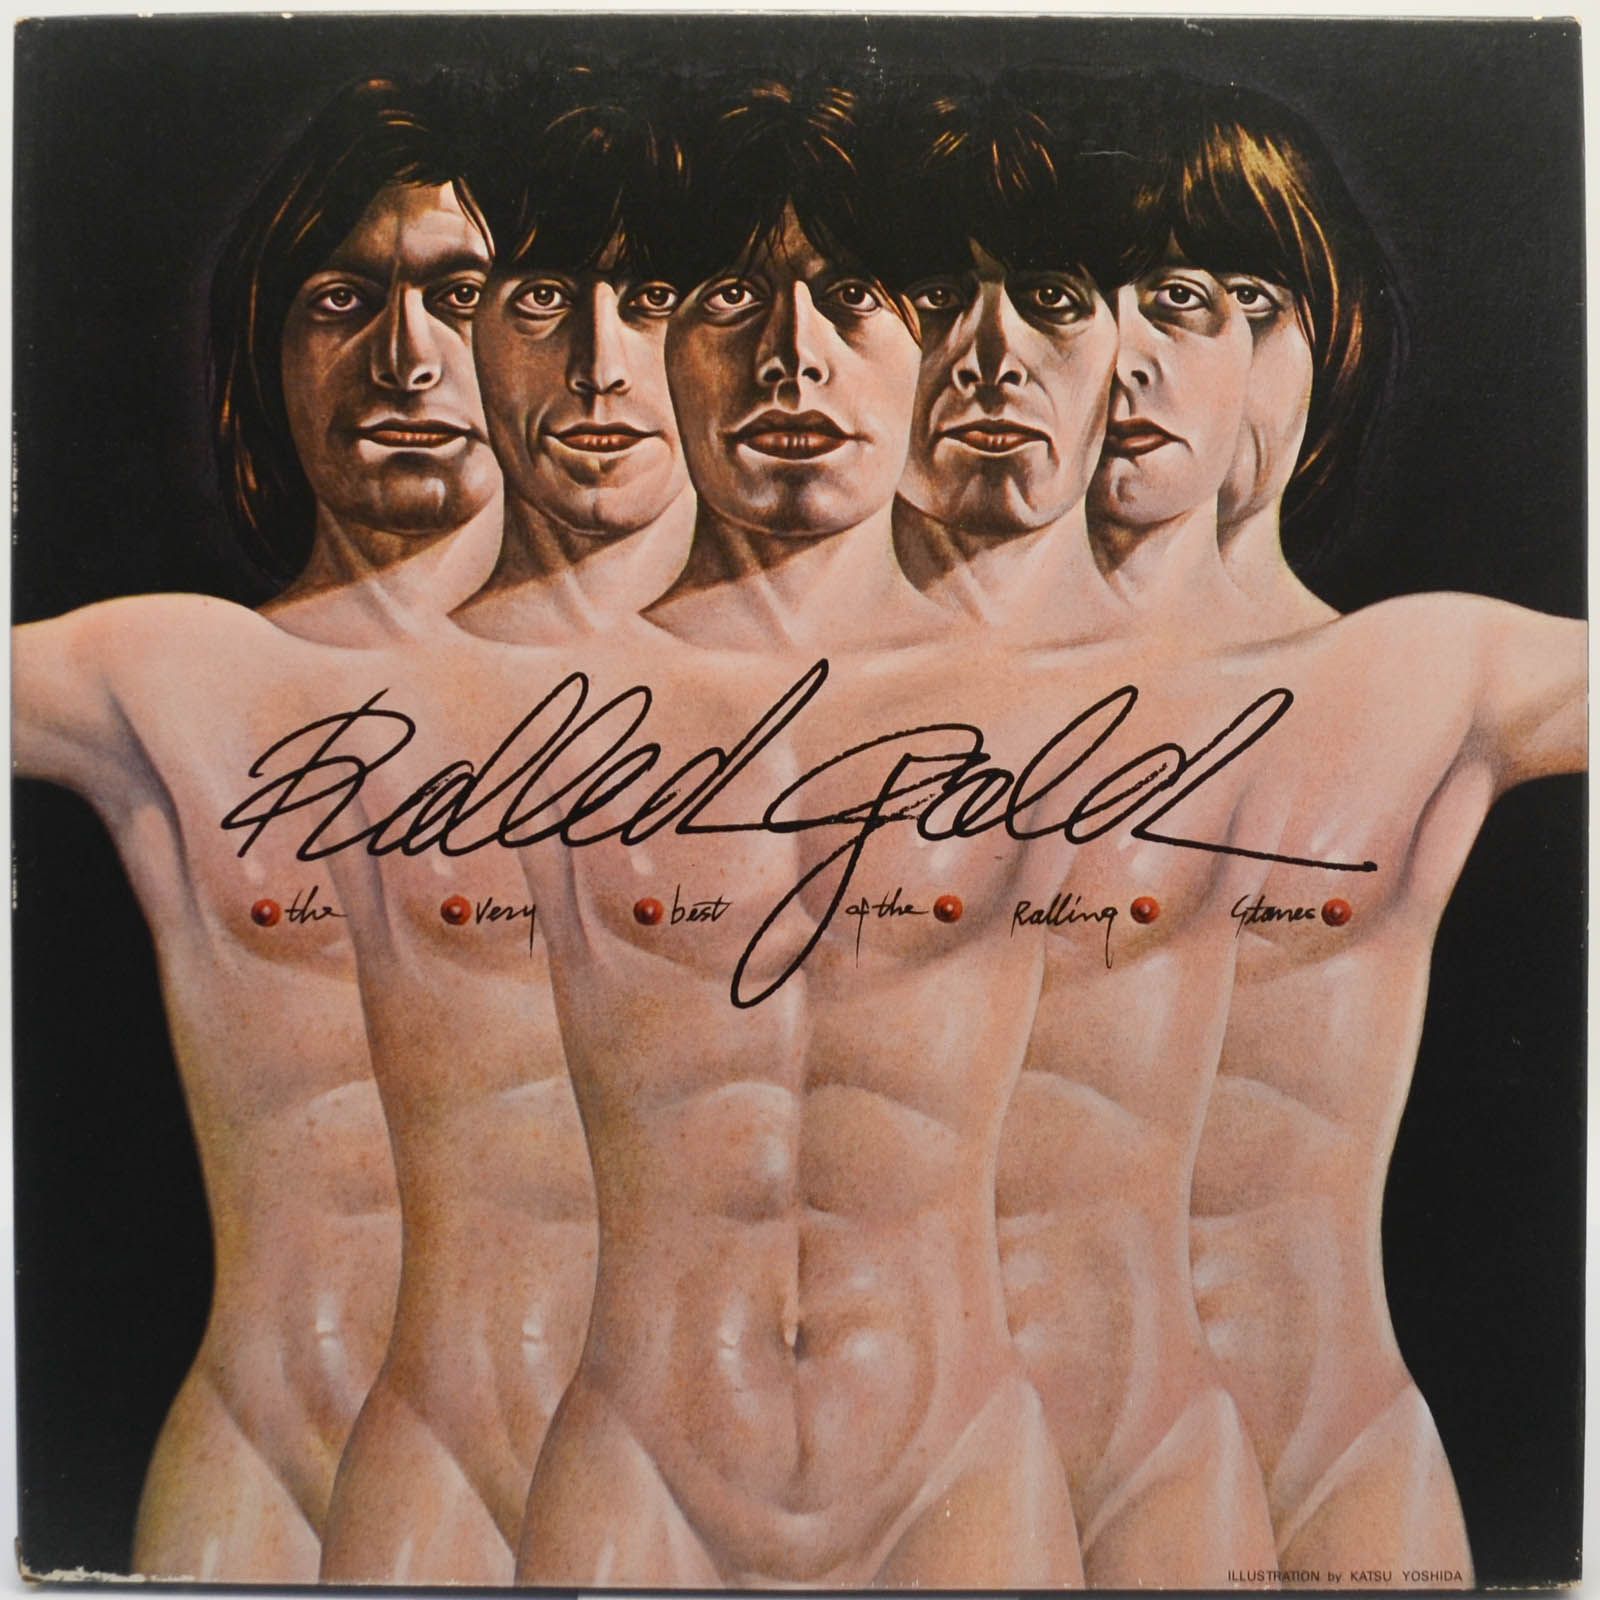 Rolling Stones — Rolled Gold - The Very Best Of The Rolling Stones (Box-set), 1975